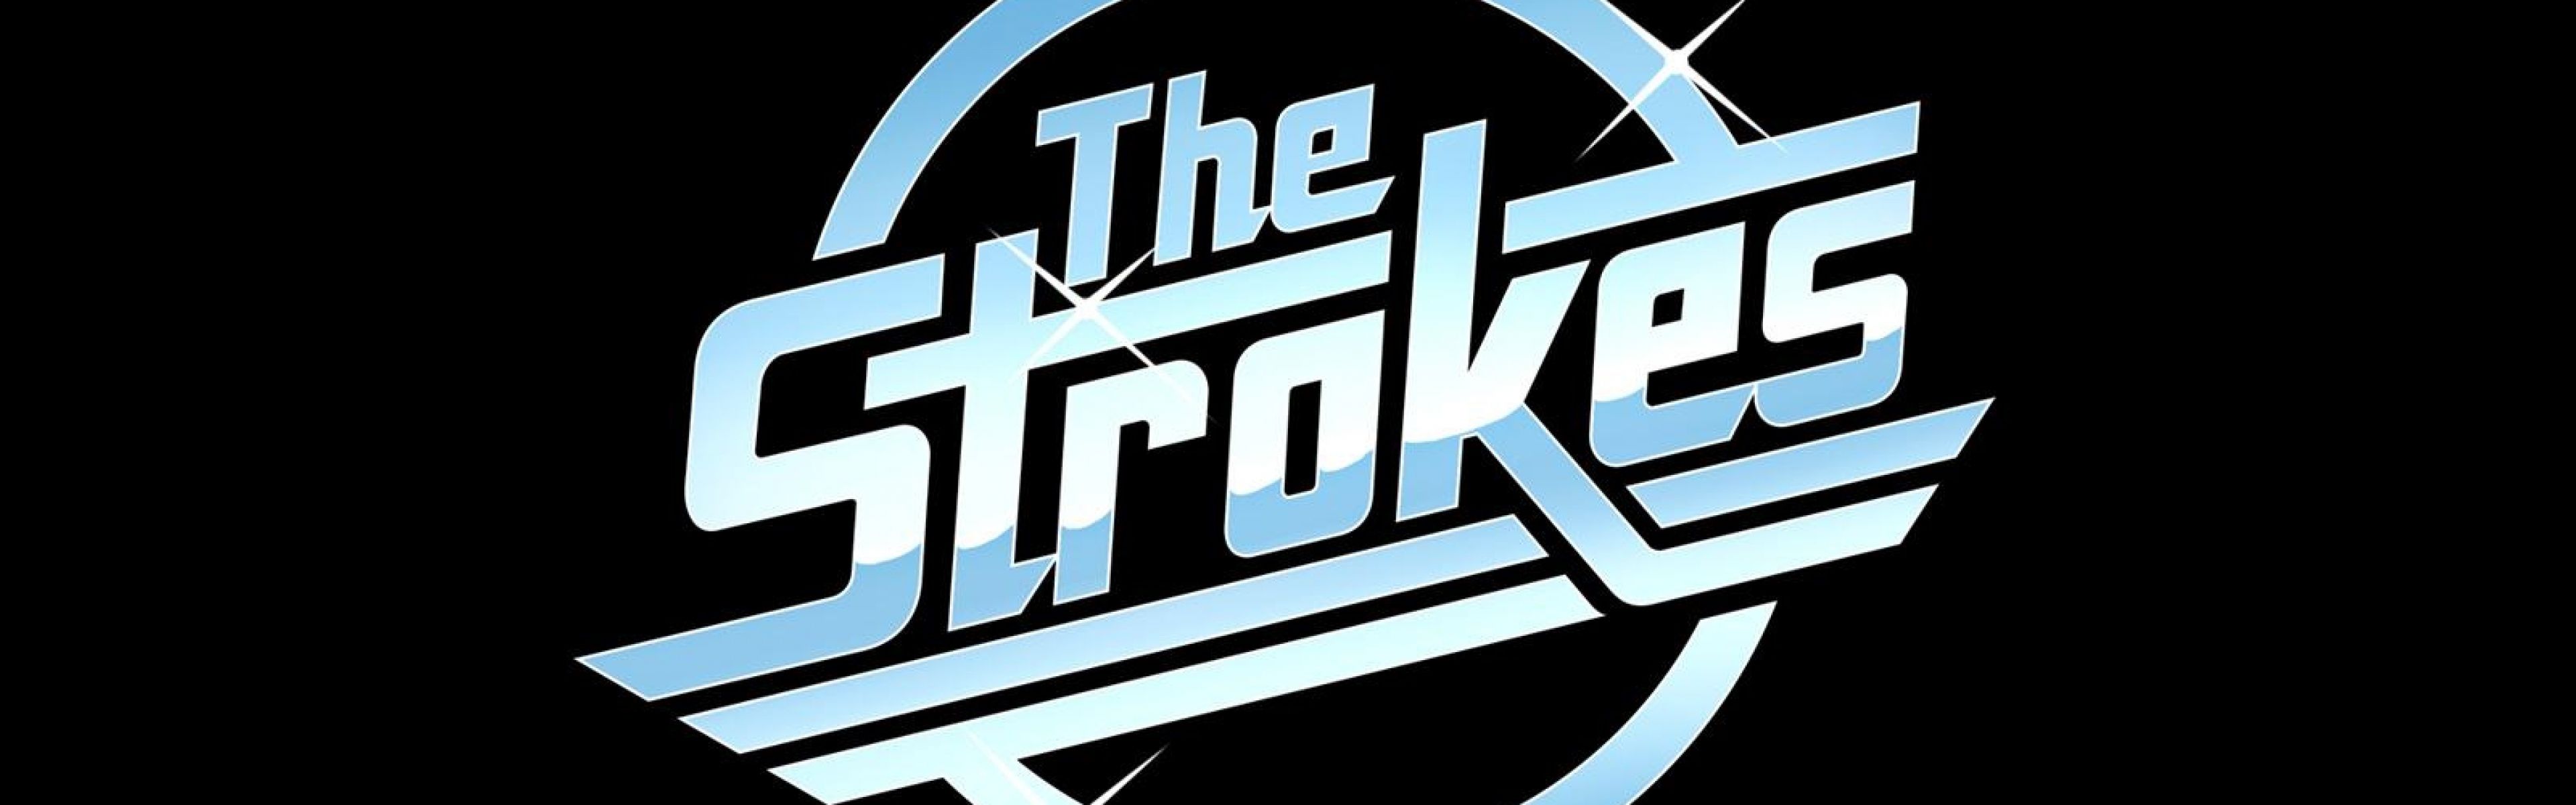 Download Wallpaper 3840x1200 The strokes, Name, Font, Shine ...